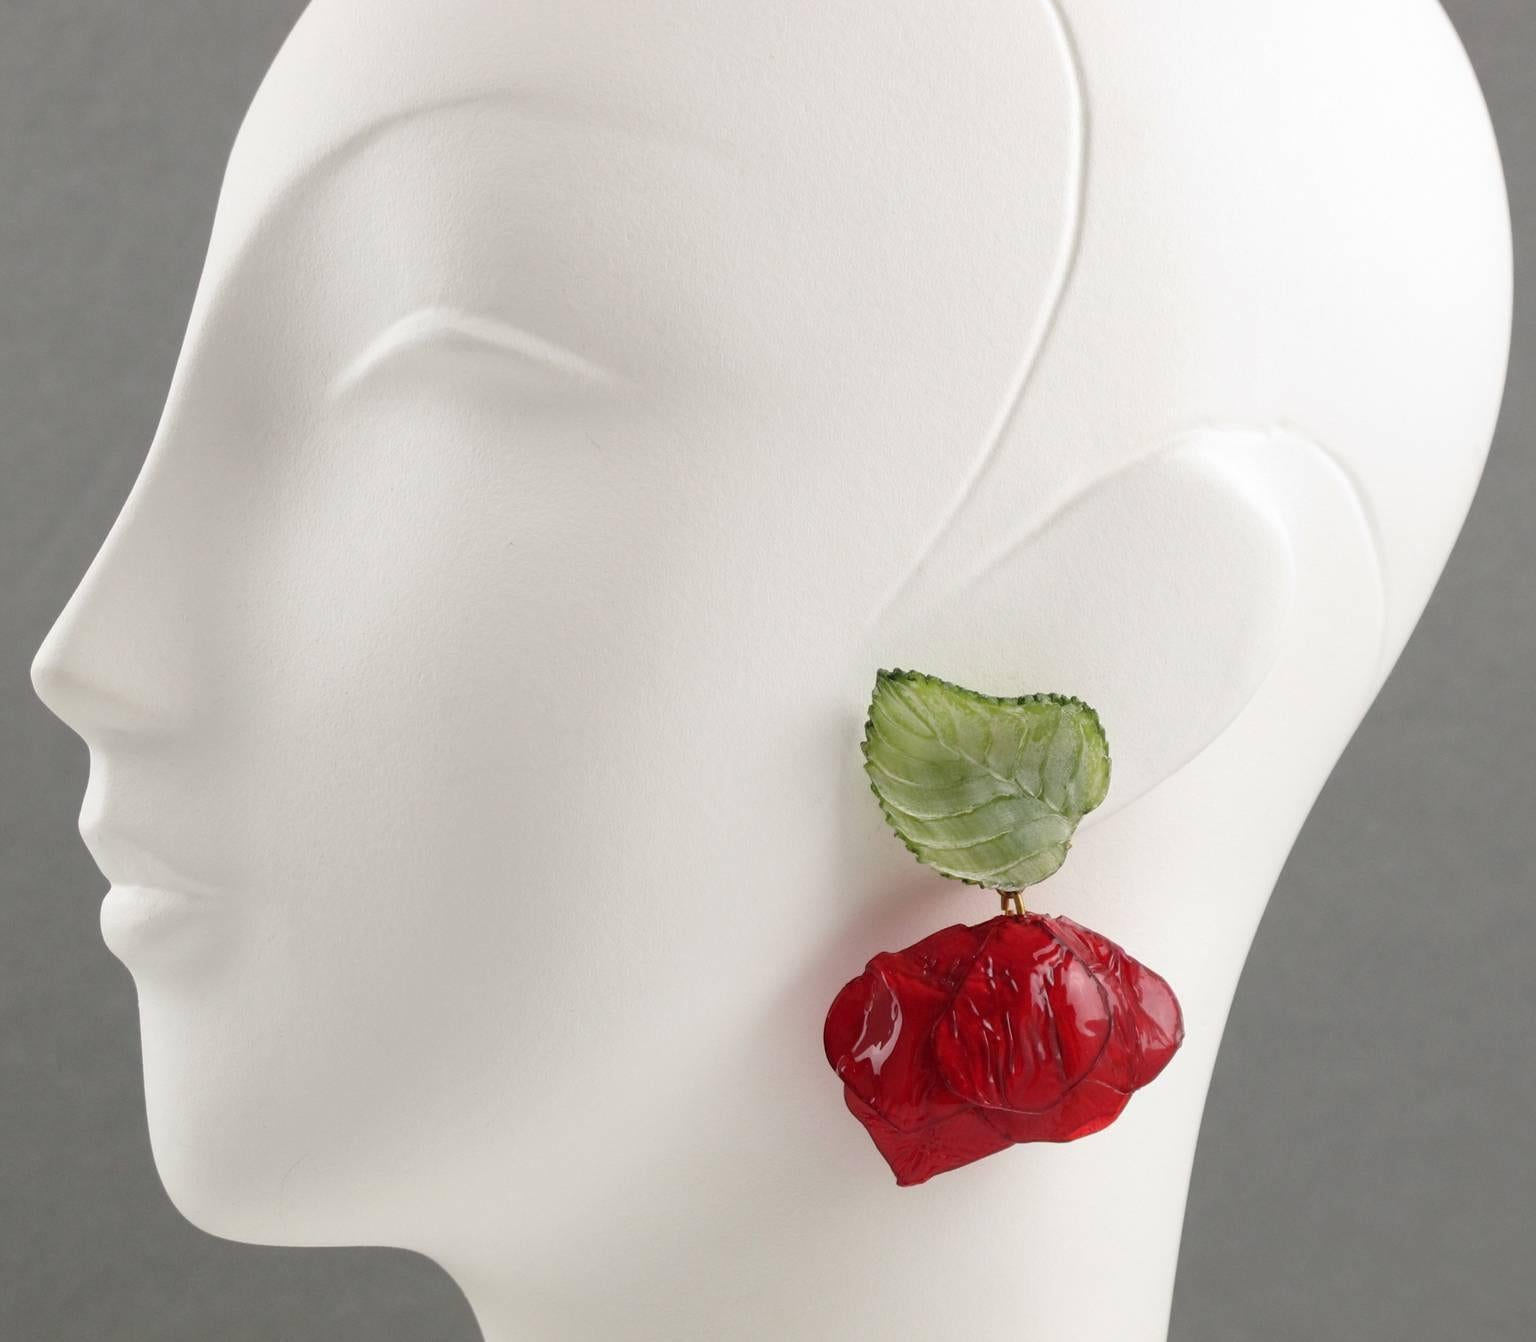 Vintage French Jewelry Designer FRANCOISE MONTAGUE Paris clip on Earrings. Elegant large dangle shape, in resin or talosel, featuring dimensional rose flower with leaf in assorted tones of bright red and tender green and clip back. Excellent vintage